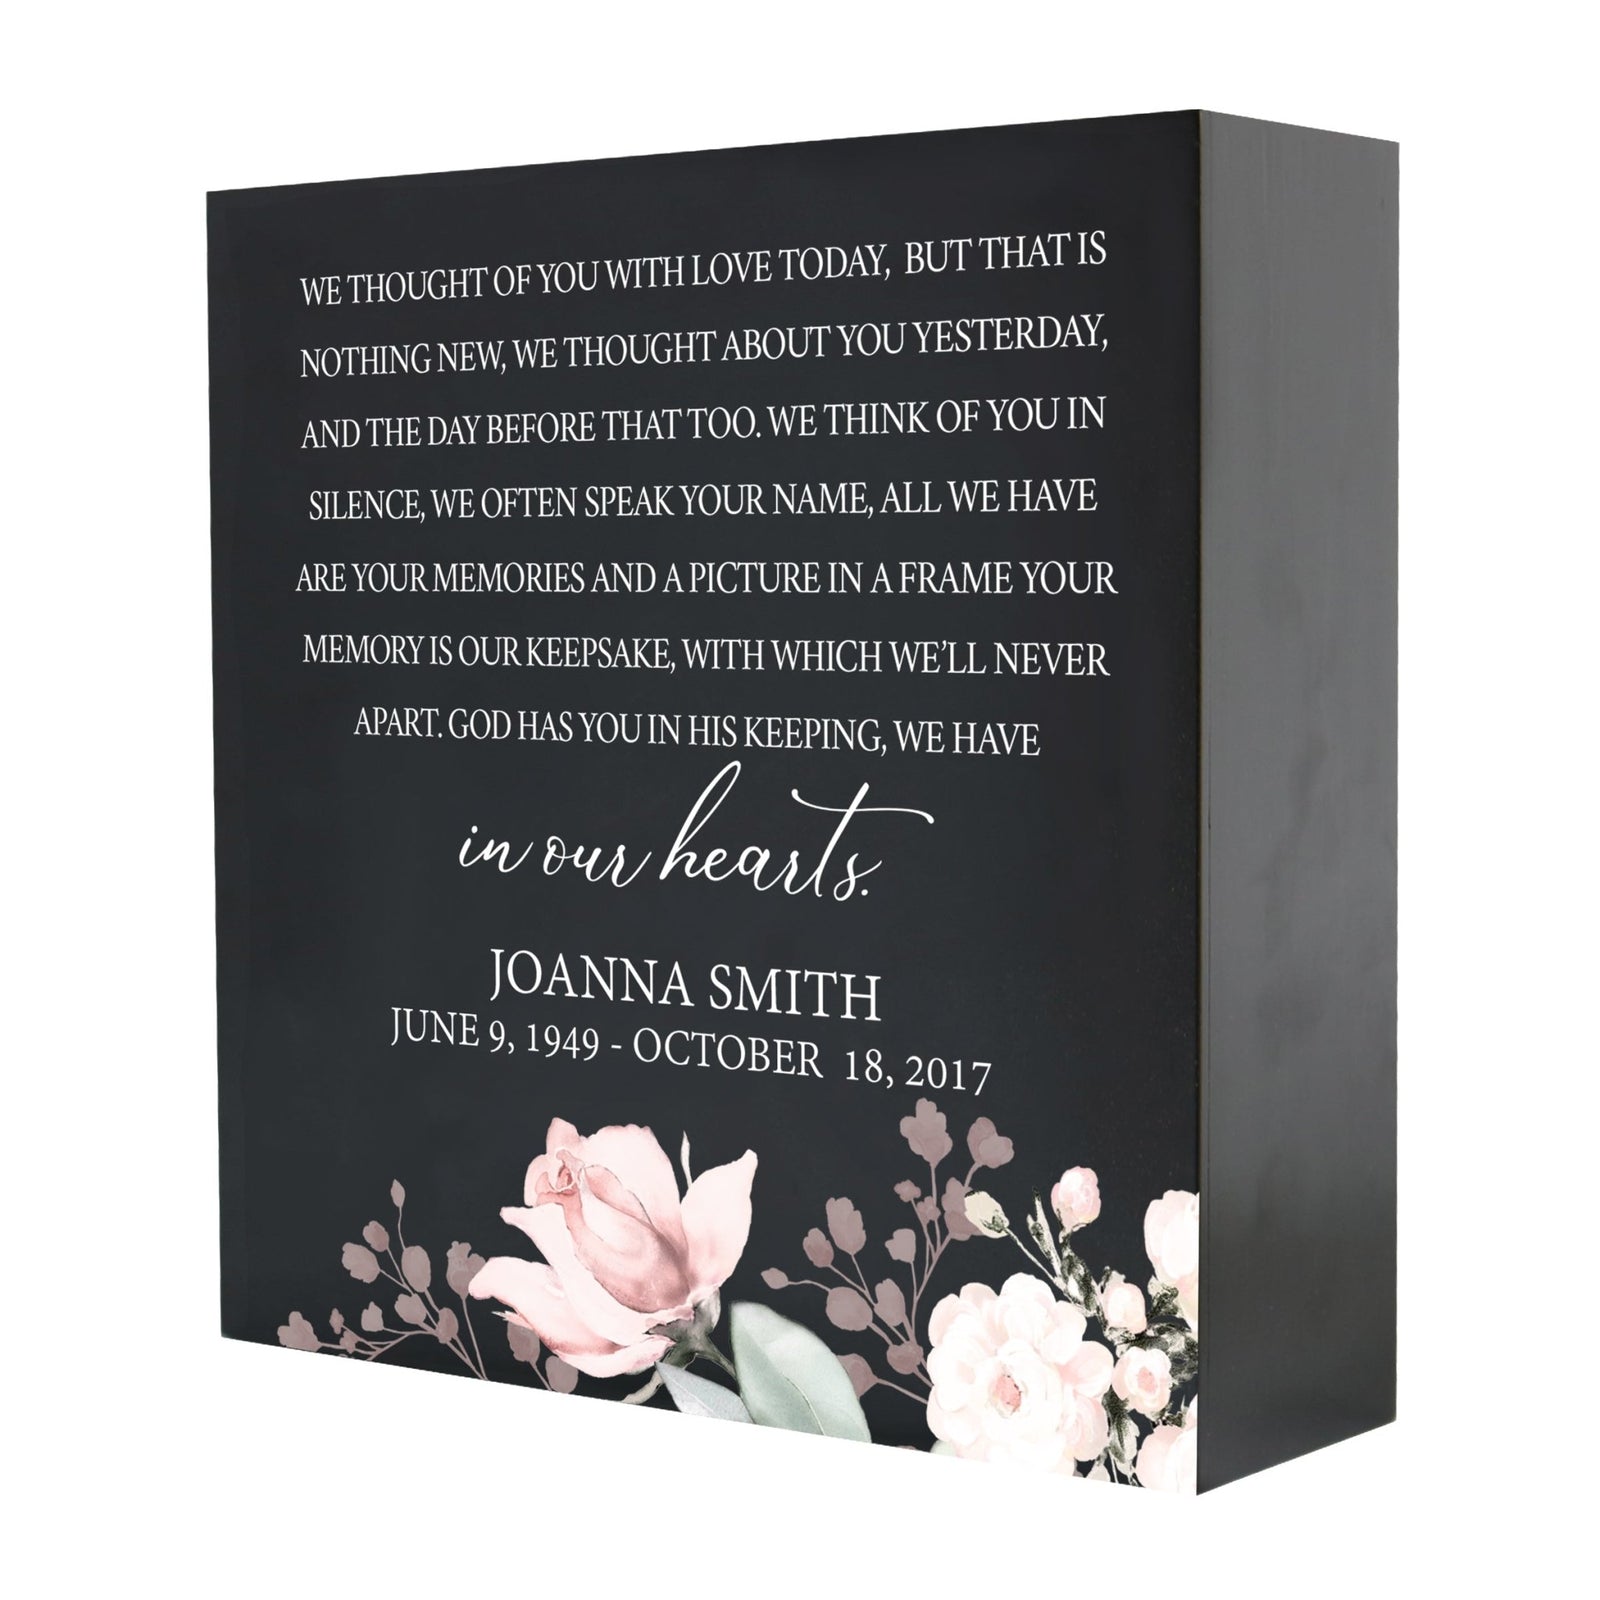 Personalized Modern Inspirational Memorial Wooden Shadow Box and Urn 10x10 holds 189 cu in of Human Ashes - We Thought Of You (Black) - LifeSong Milestones